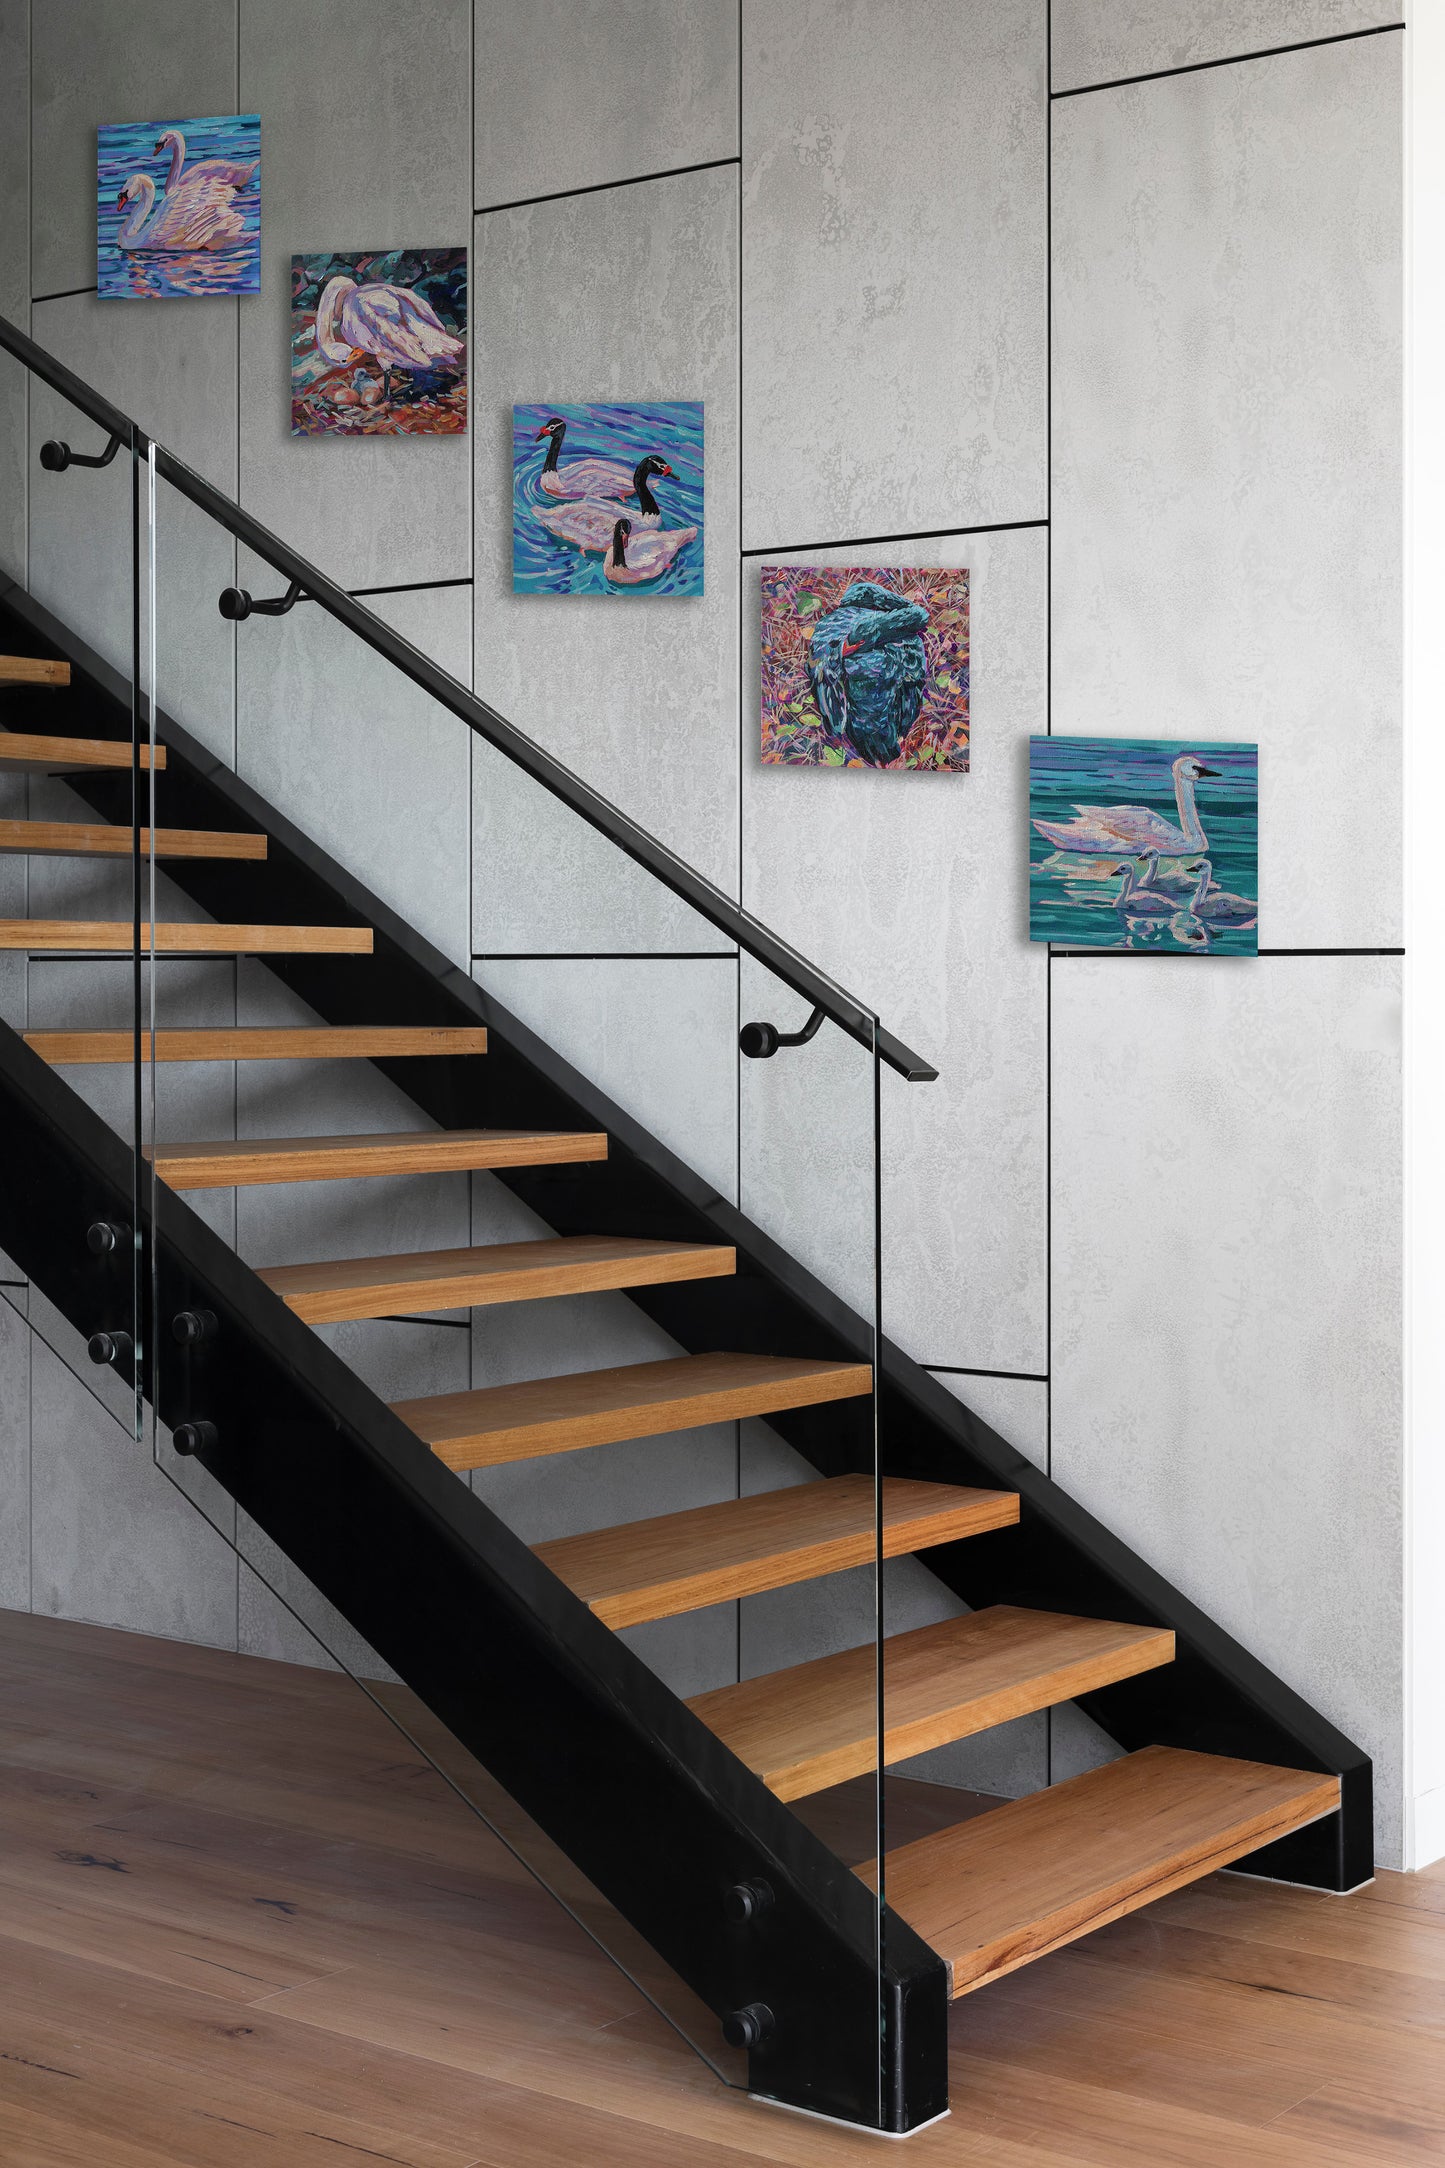 swan paintings on wall with staircase